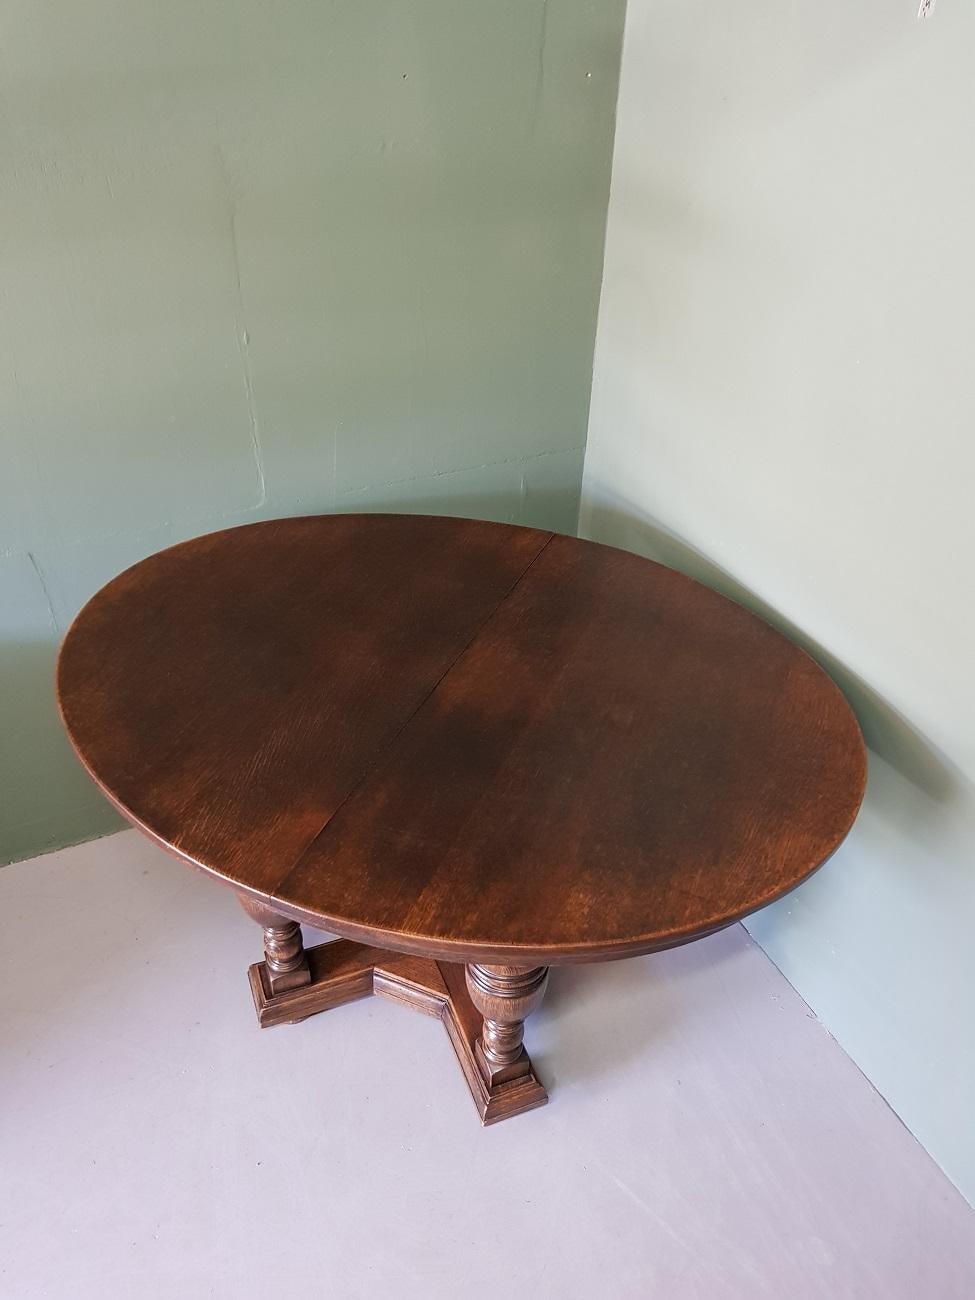 Mid-20th century Dutch oak extendable dining room table with extra leaf that is slightly warped with bottle shaped legs in the style of the Renaissance, from the 1950s.

The measurements are:
Depth 100 cm/ 39.3 inch.
Width 130 cm - 170 cm/ 51.1